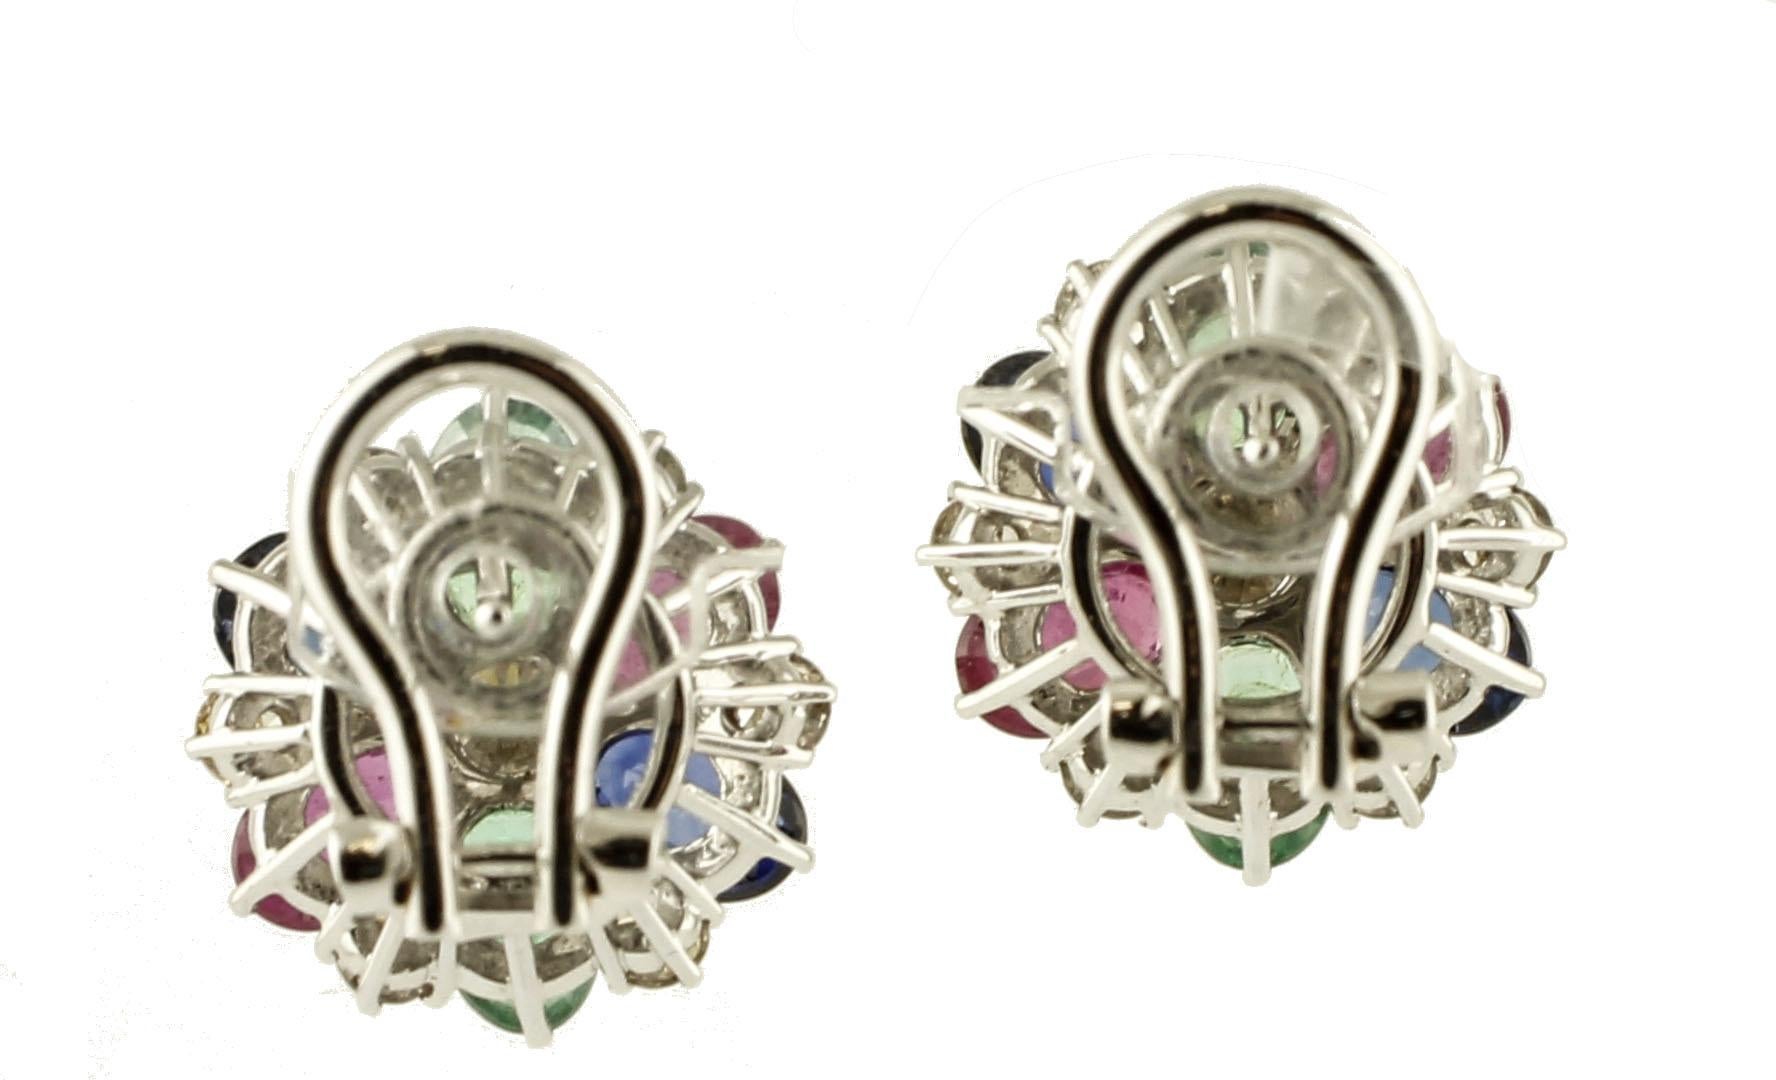 Gorgeous pair of stud earrings in 14k white gold structure setted with diamonds, emeralds, rubies and blue sapphires, 
These earrings are totally handmade by Italian master goldsmiths
Lateral Diamonds 0.9 ct
Central diamonds 0.92 ct
Rubies,